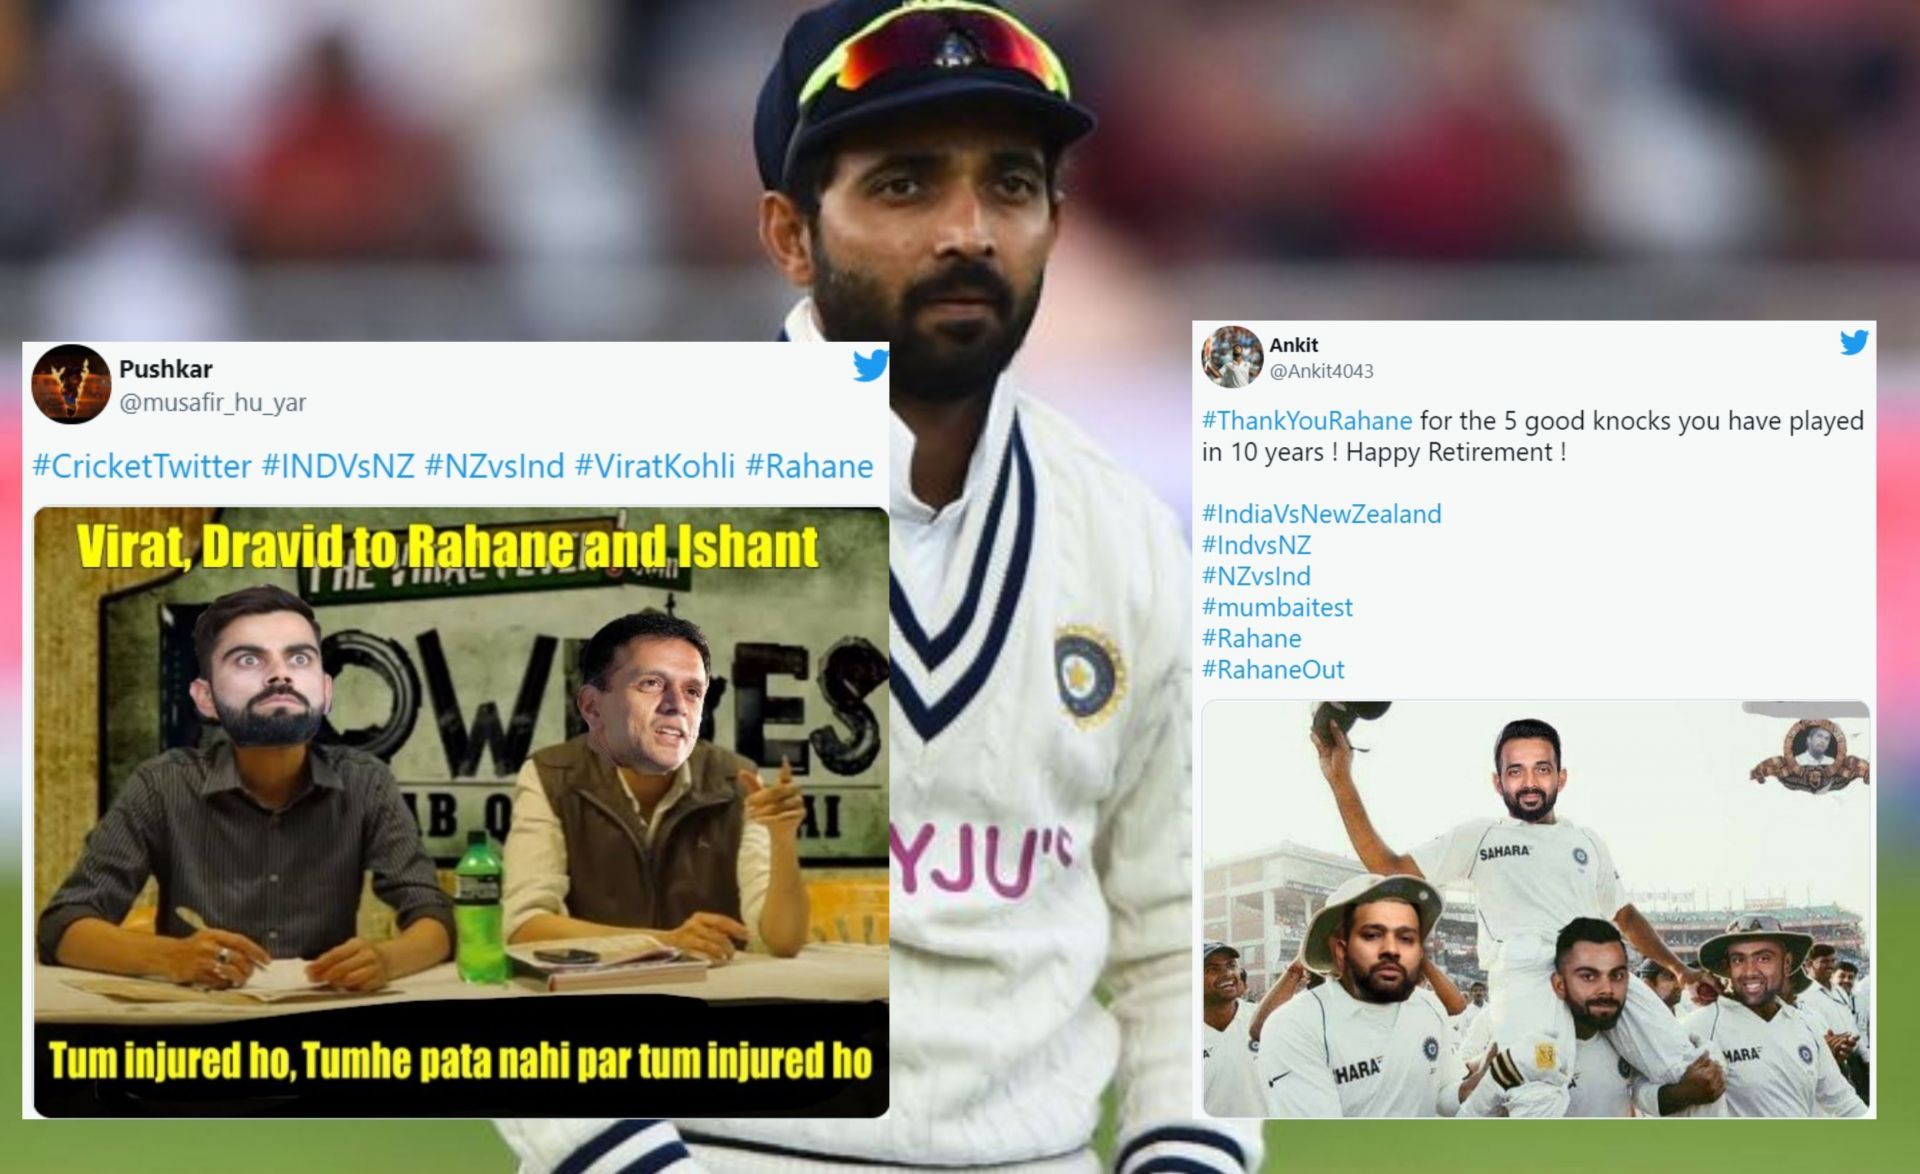 Fans express their doubts over the authenticity of Ajinkya Rahane&#039;s injury